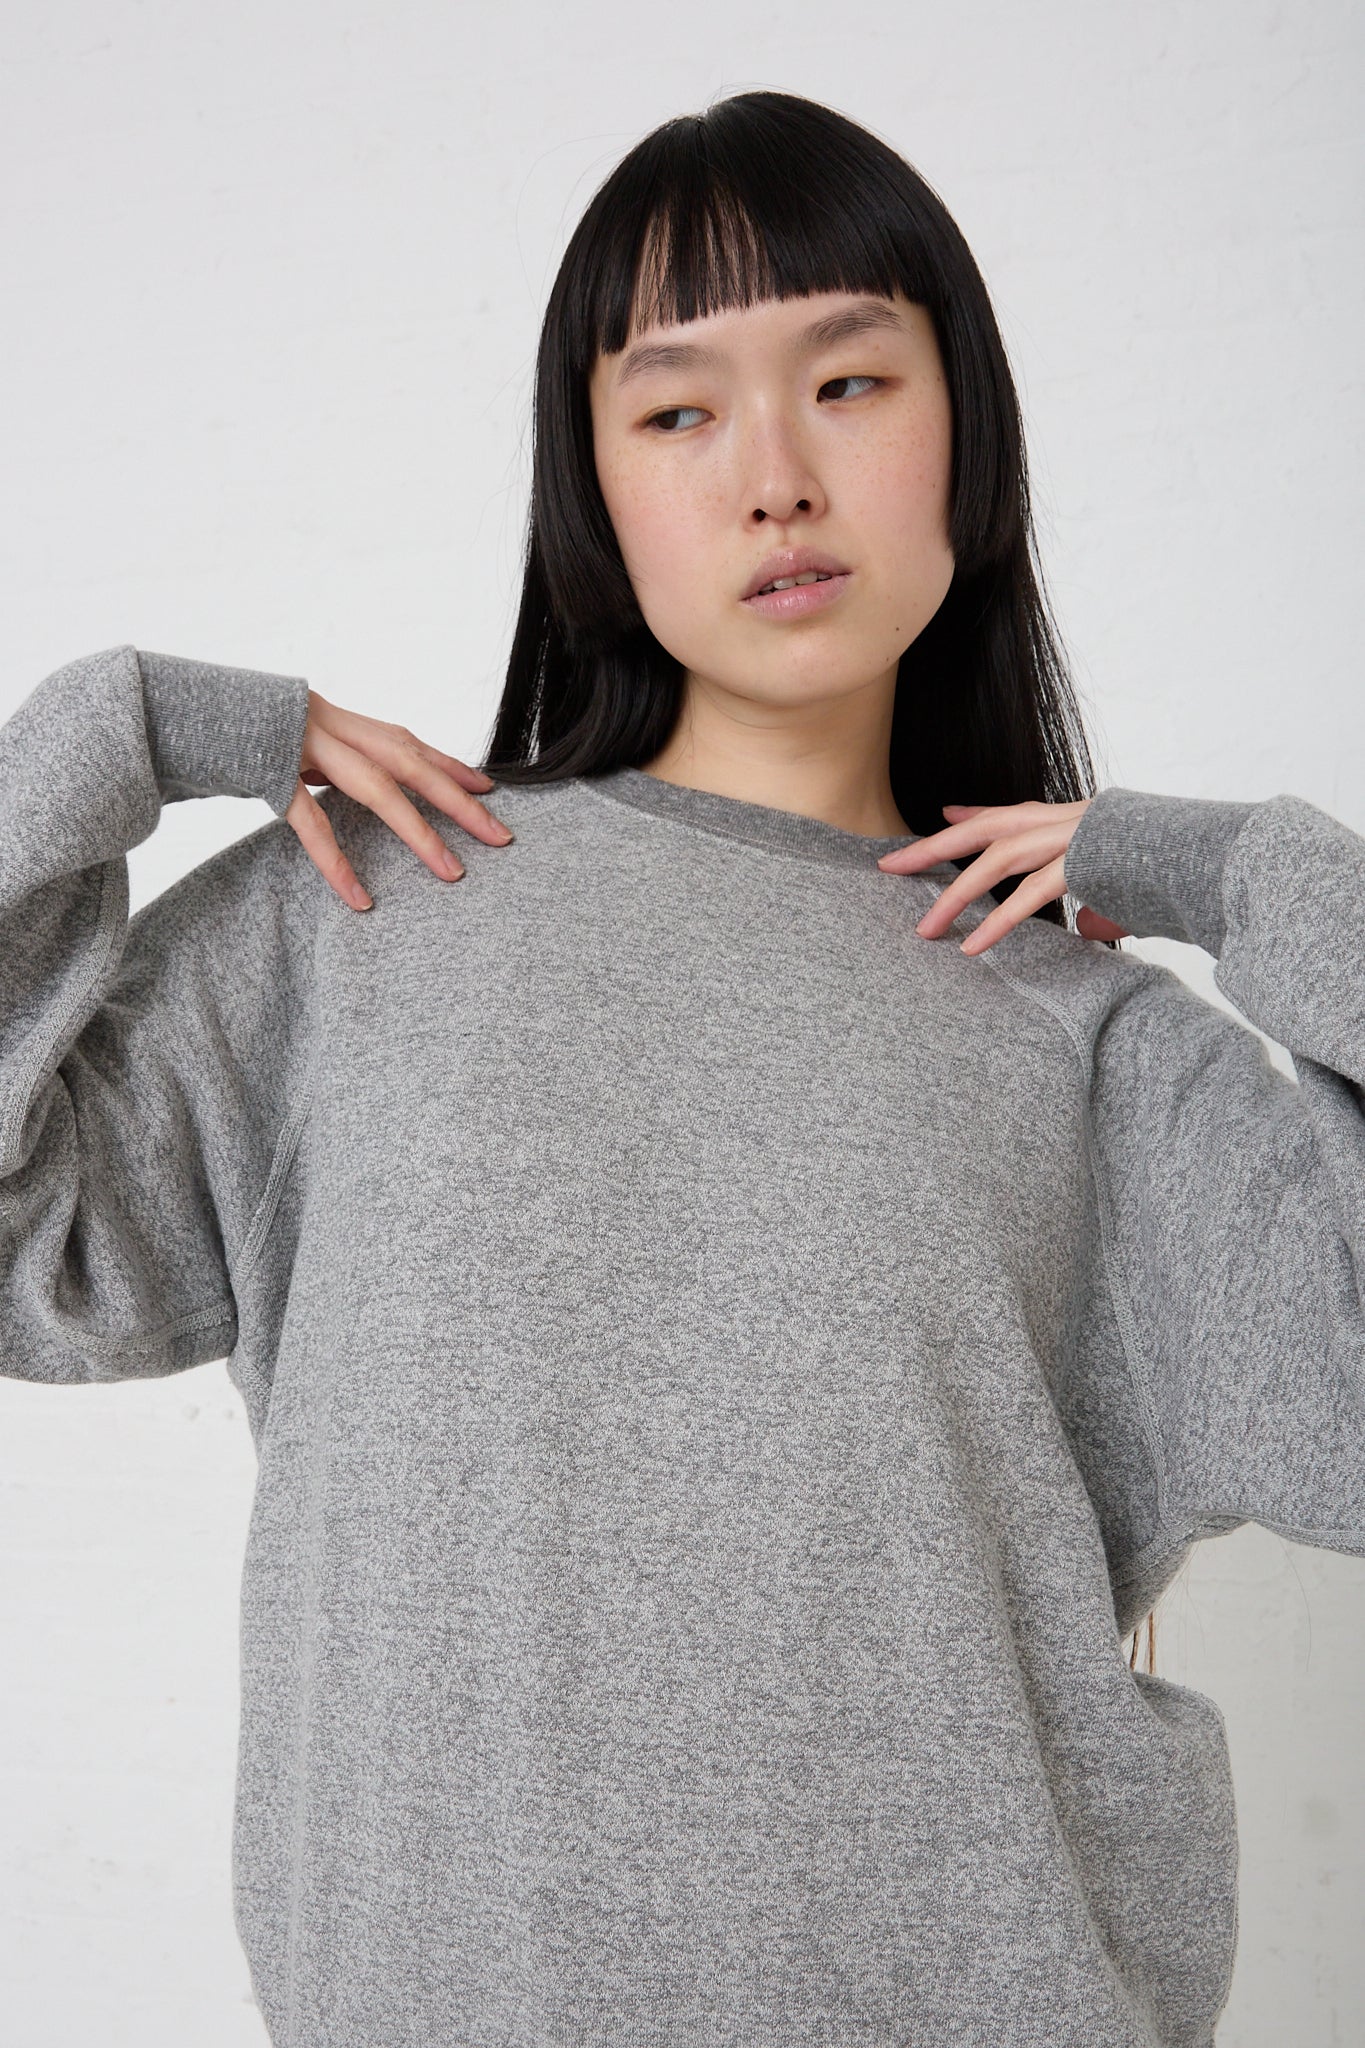 The model is wearing a French Terry Sweatshirt in Heather Grey from B Sides. Front view.